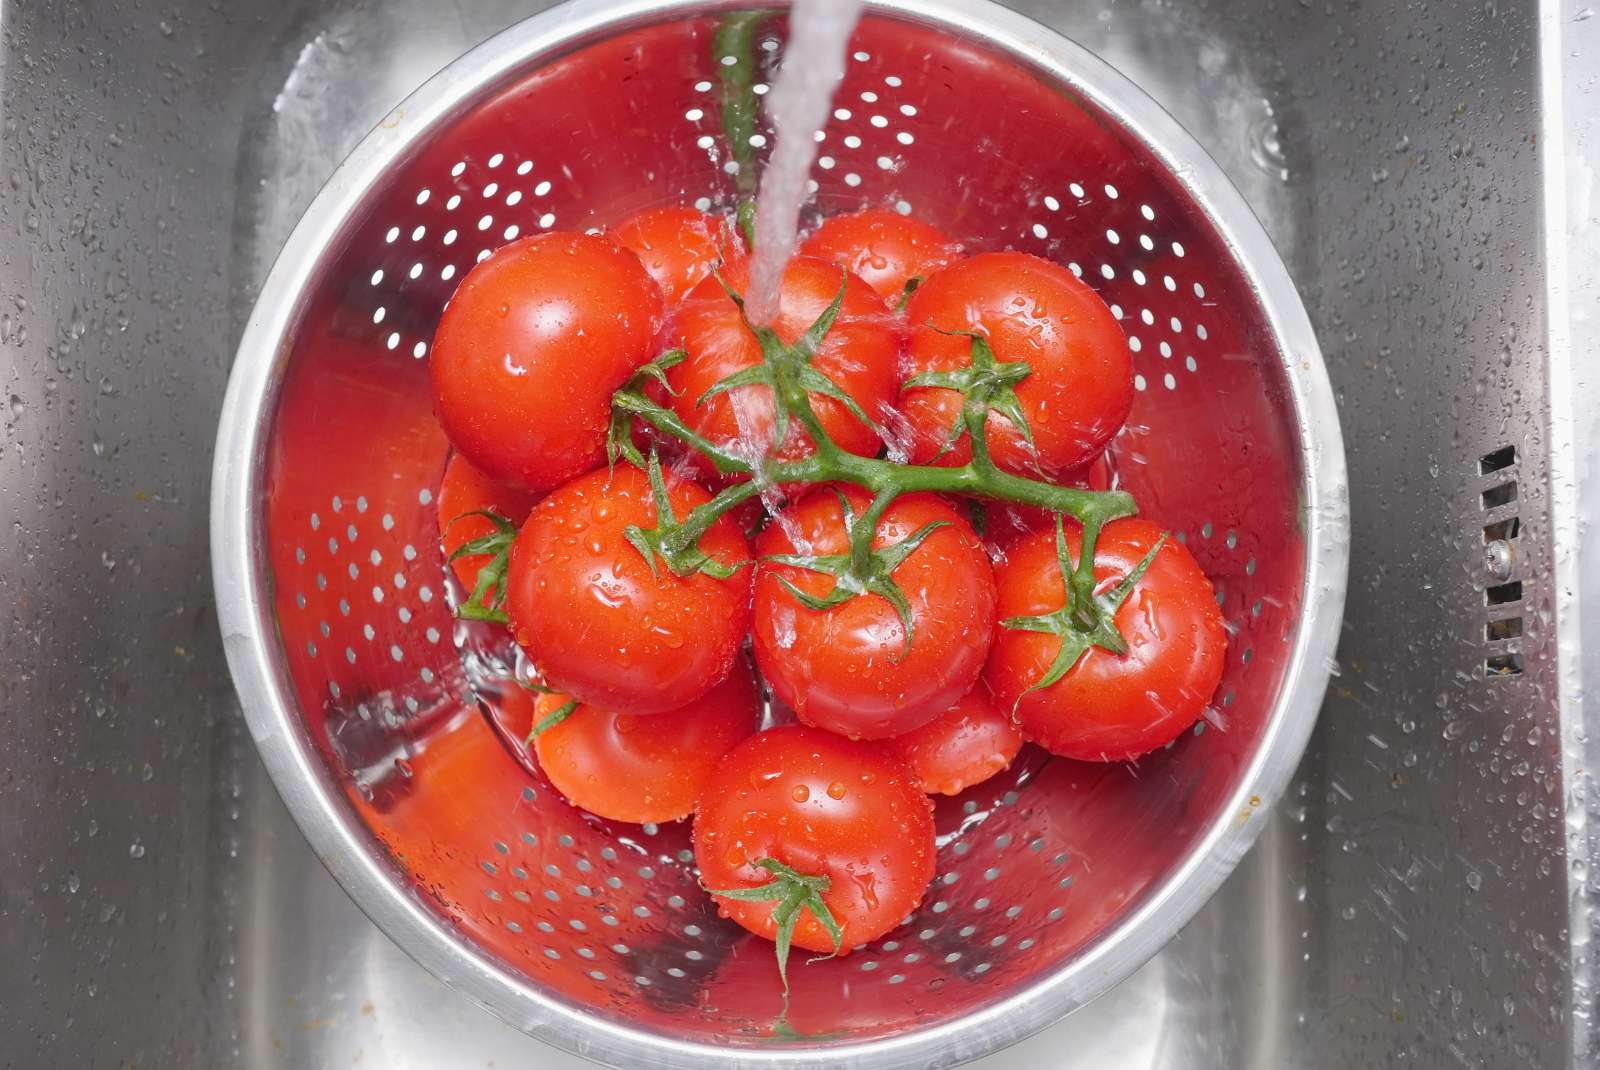 Does washing tomatoes remove pesticides?